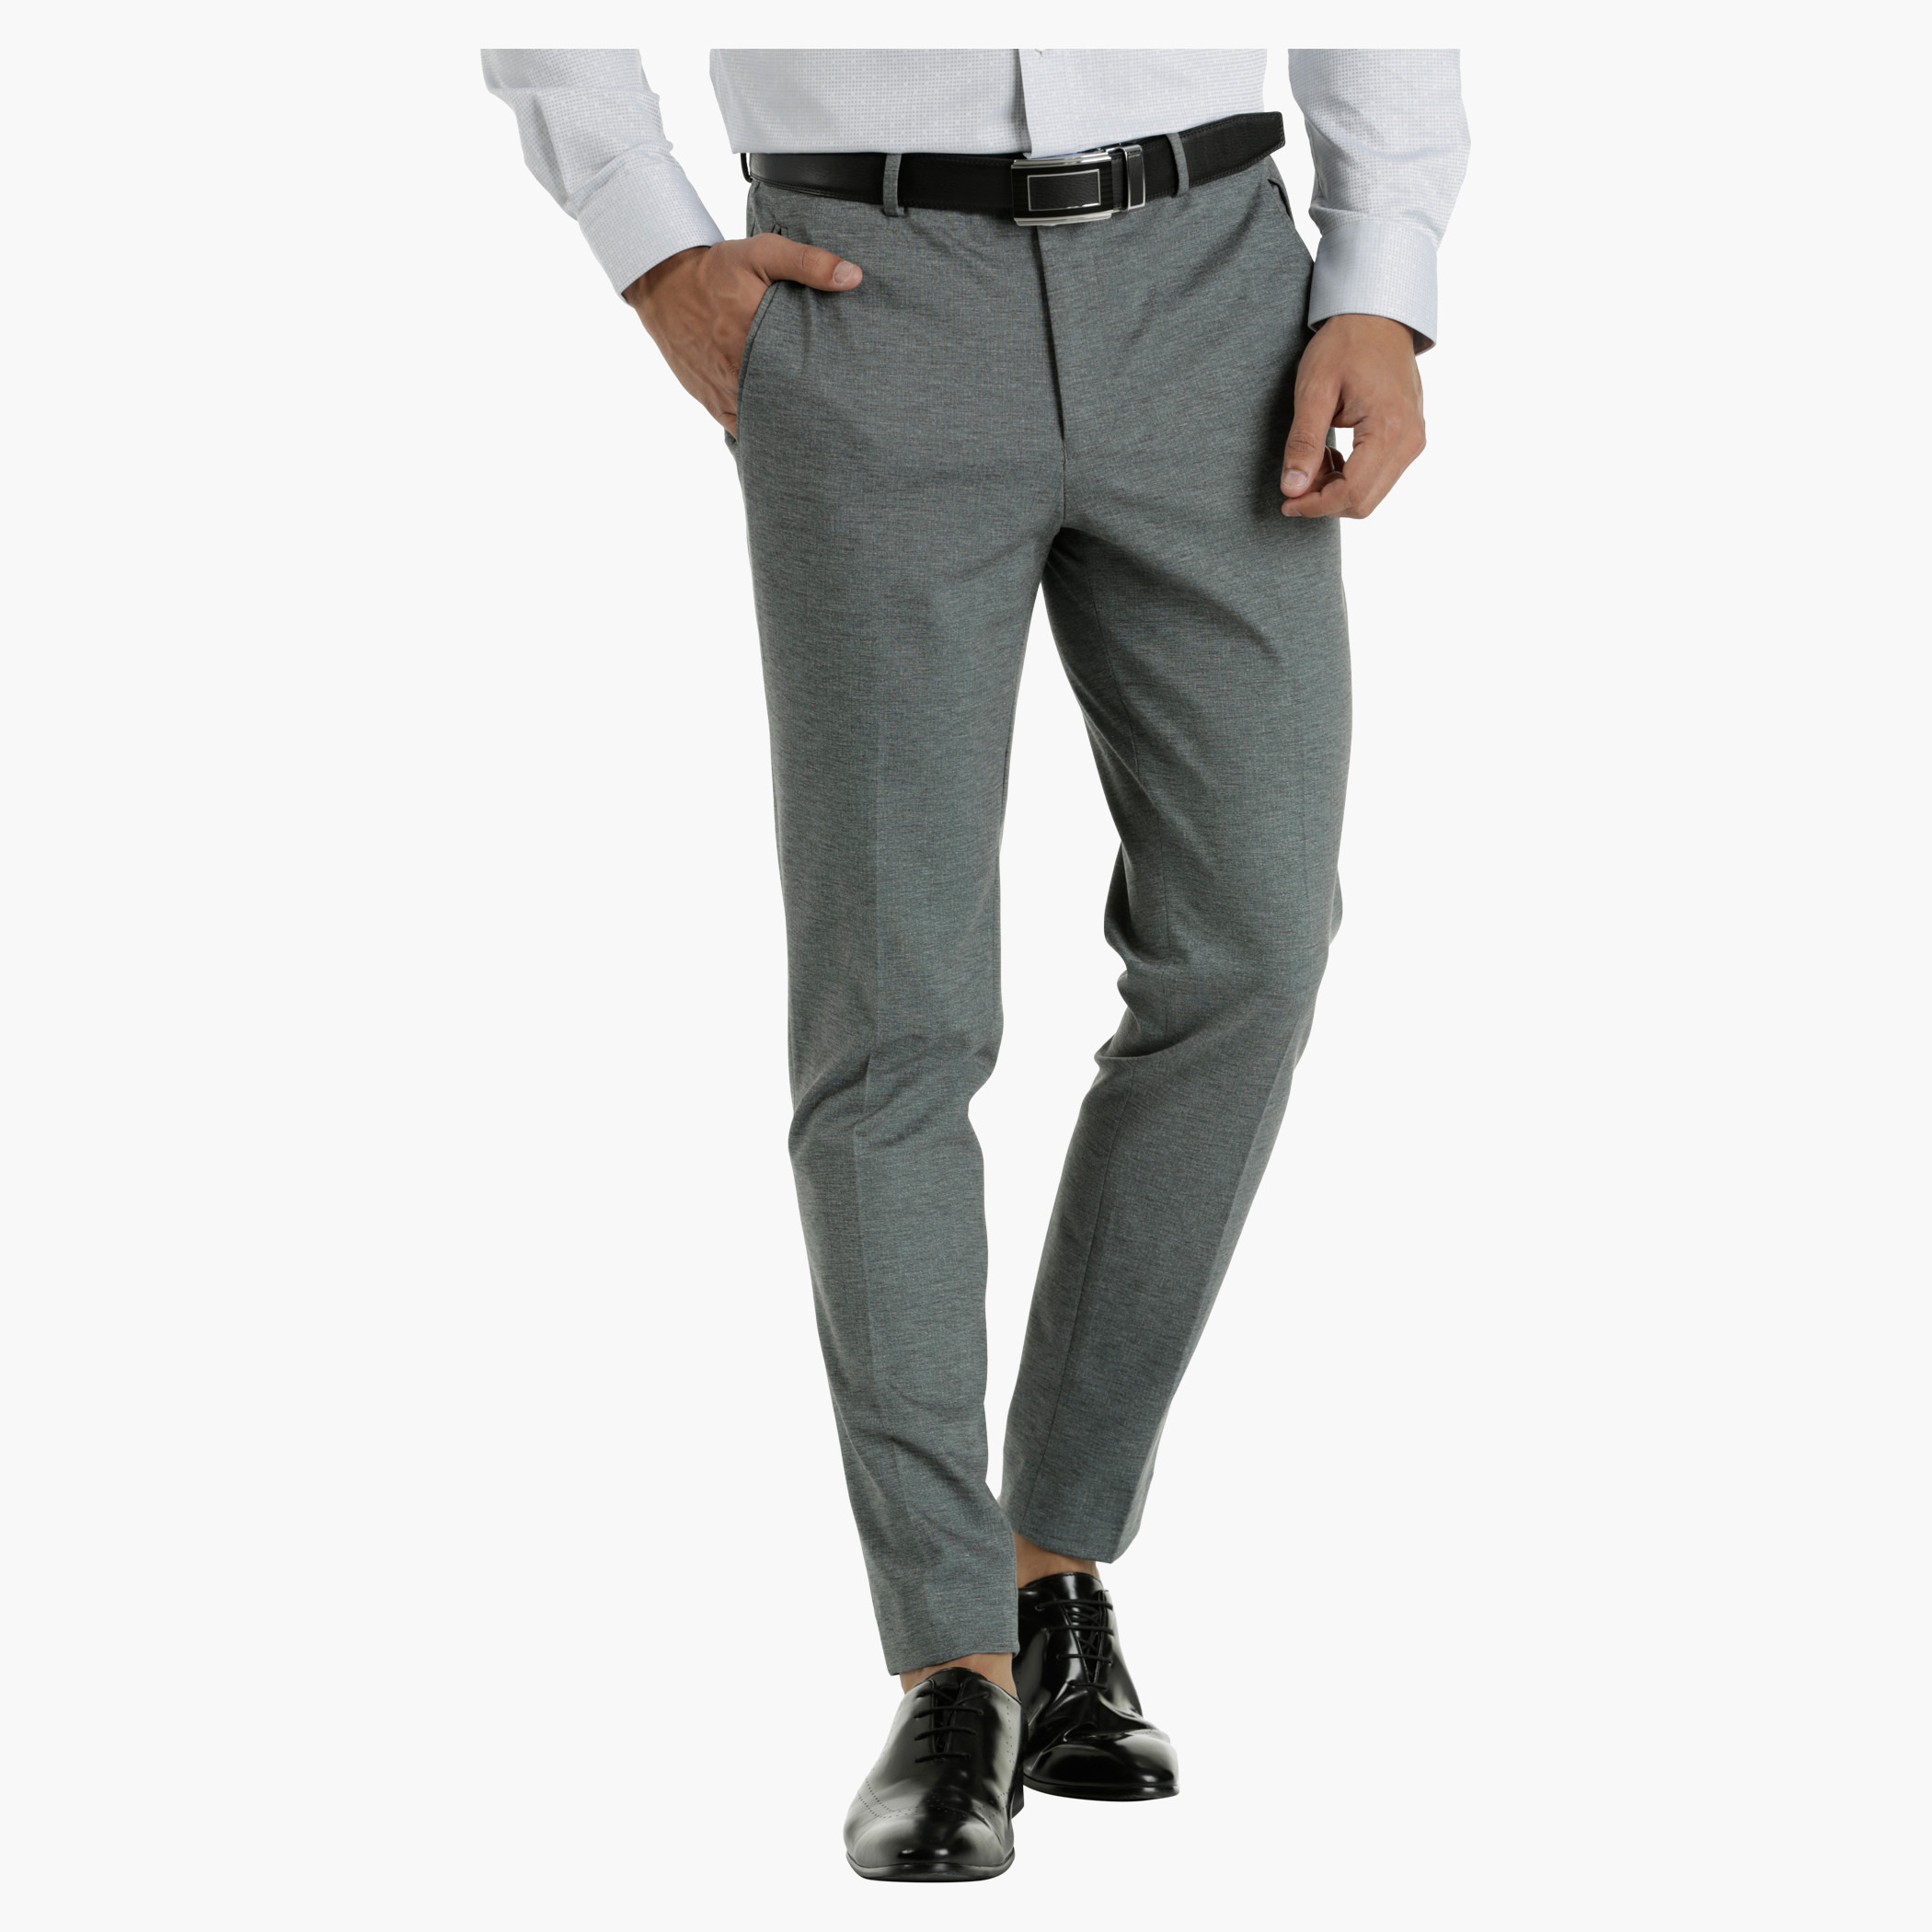 Men's Slim Fit Skinny Dress Pant Classic Casual Tapered Suit Pant Summer  Lightweight Business Comfort Trousers (Grey,30) at Amazon Men's Clothing  store